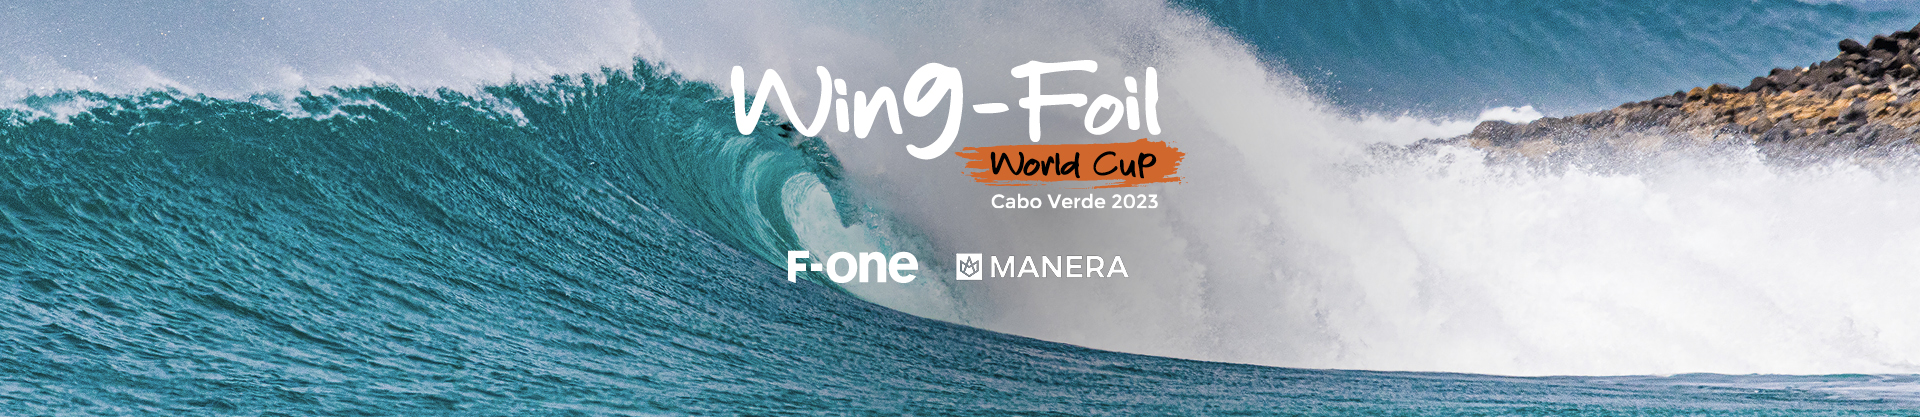 Image for GWA Wingfoil World Cup Cape Verde 2023